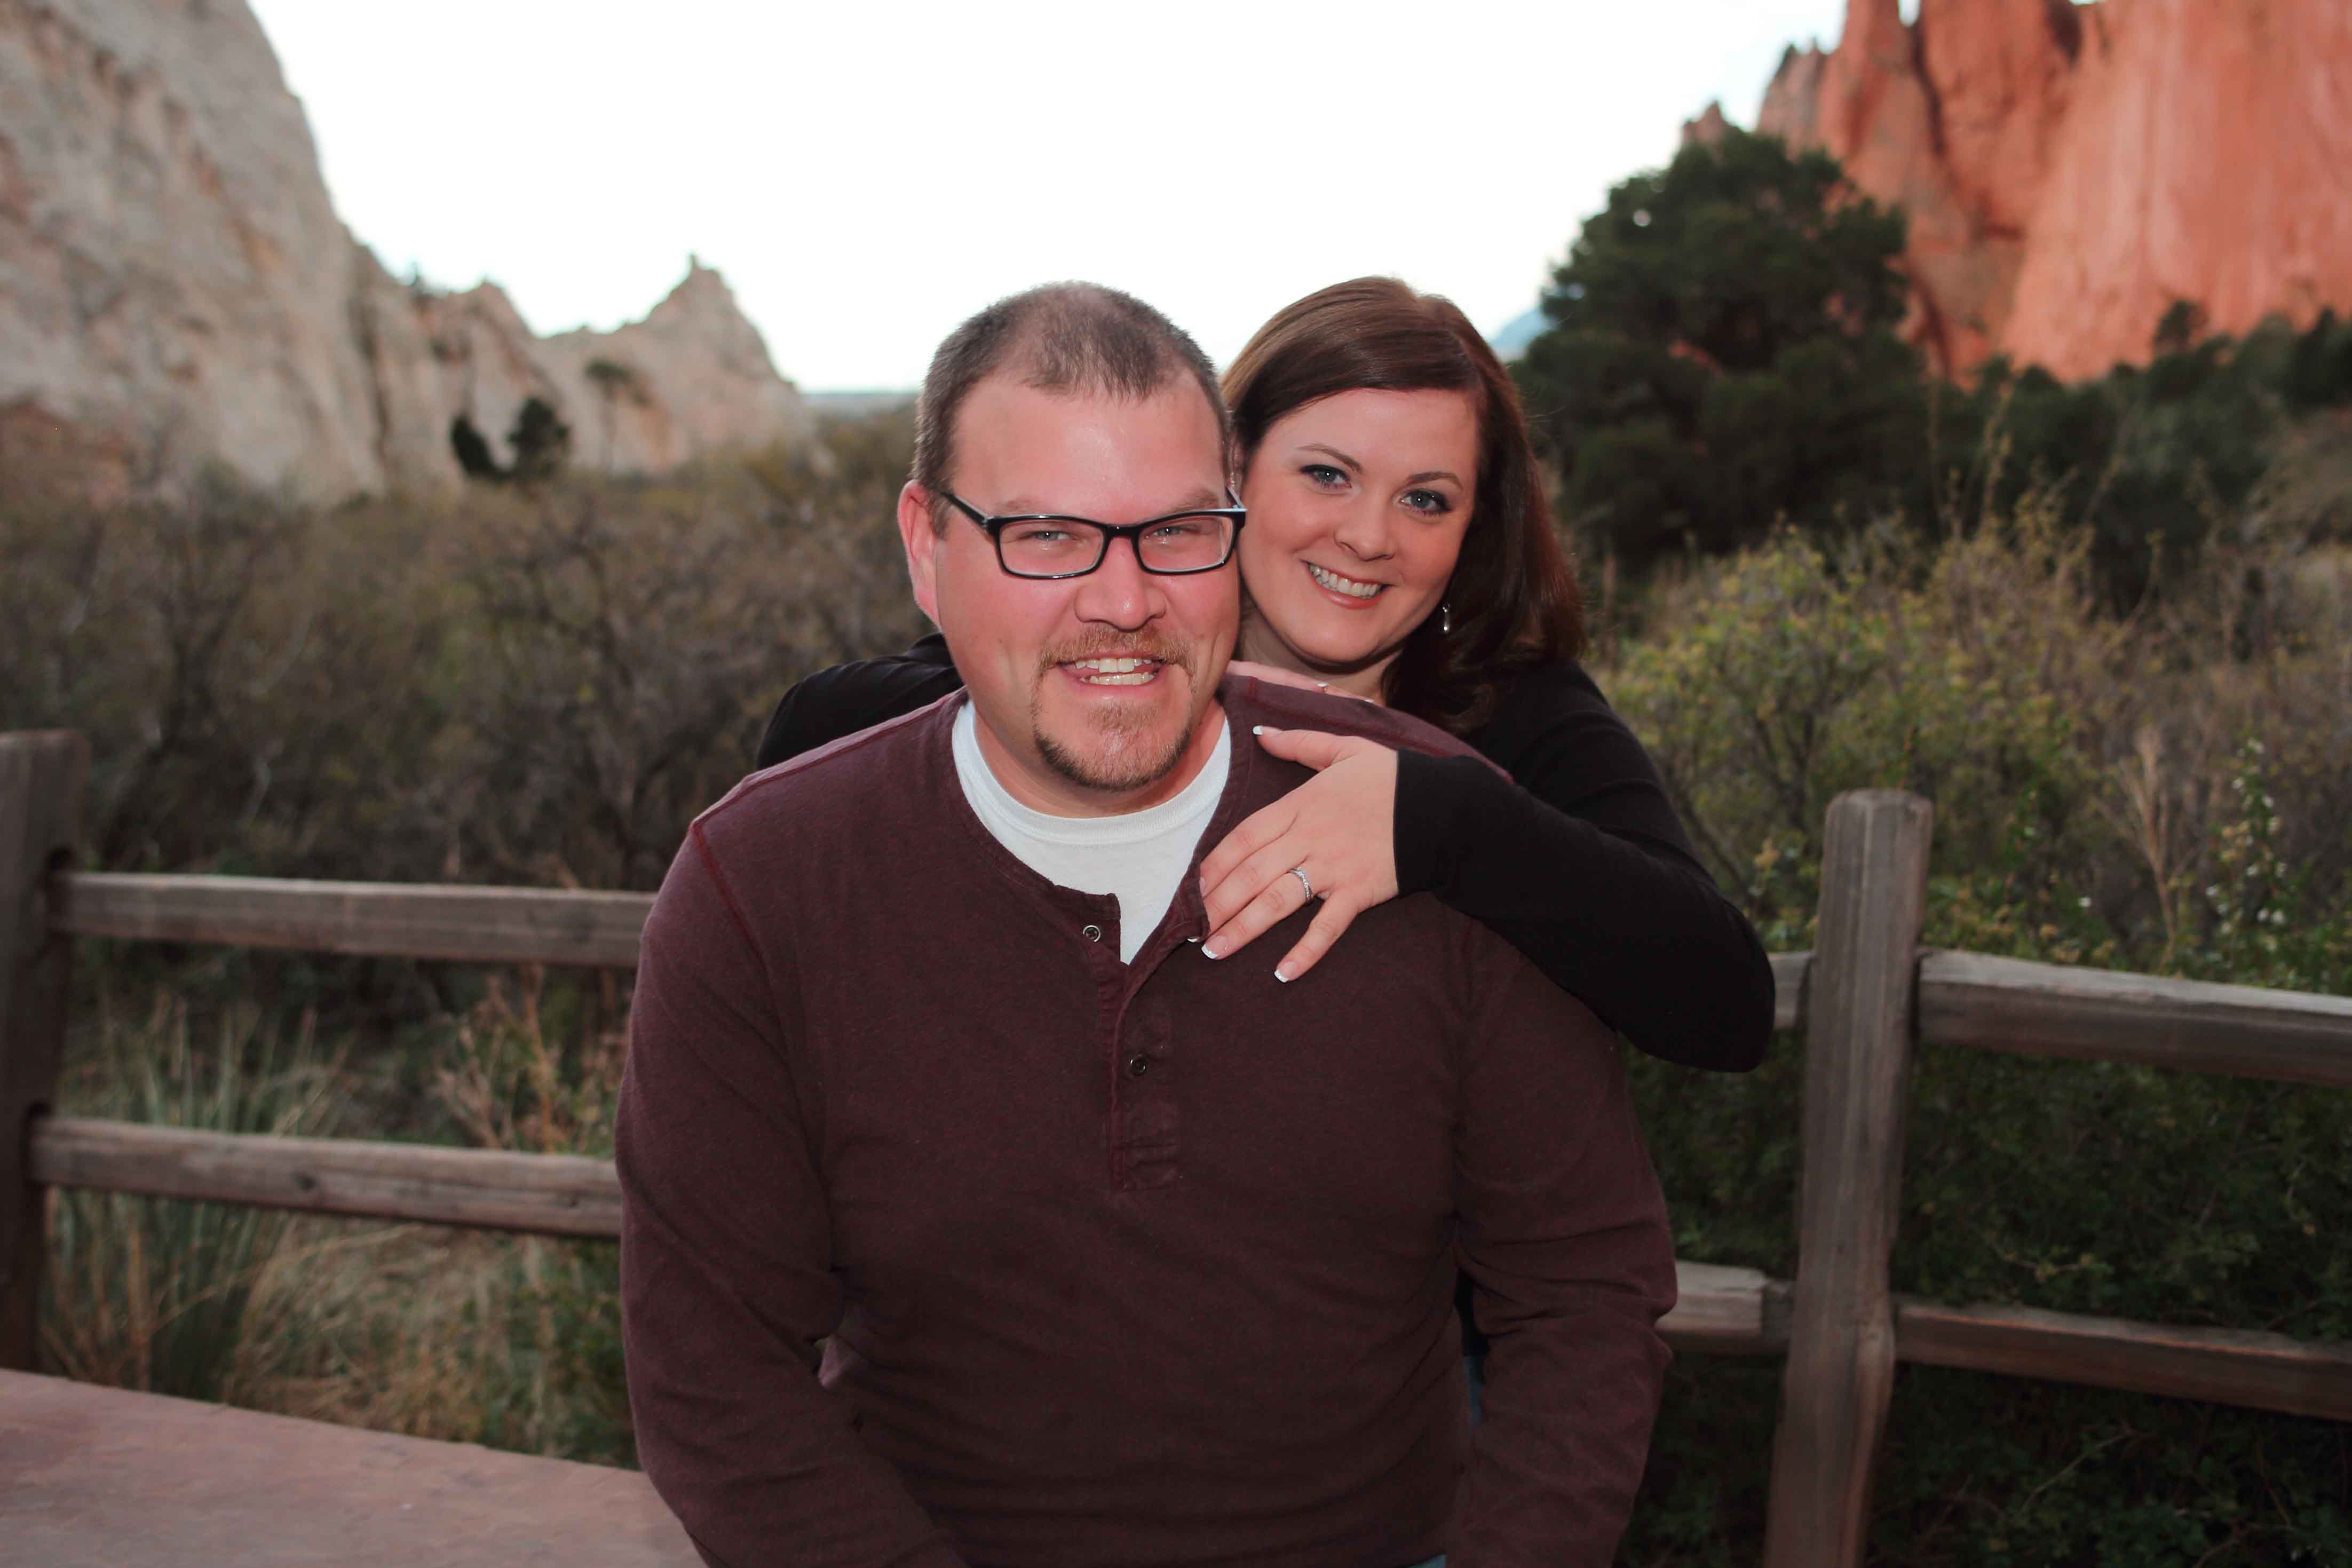 Engagement session at Garden of the Gods